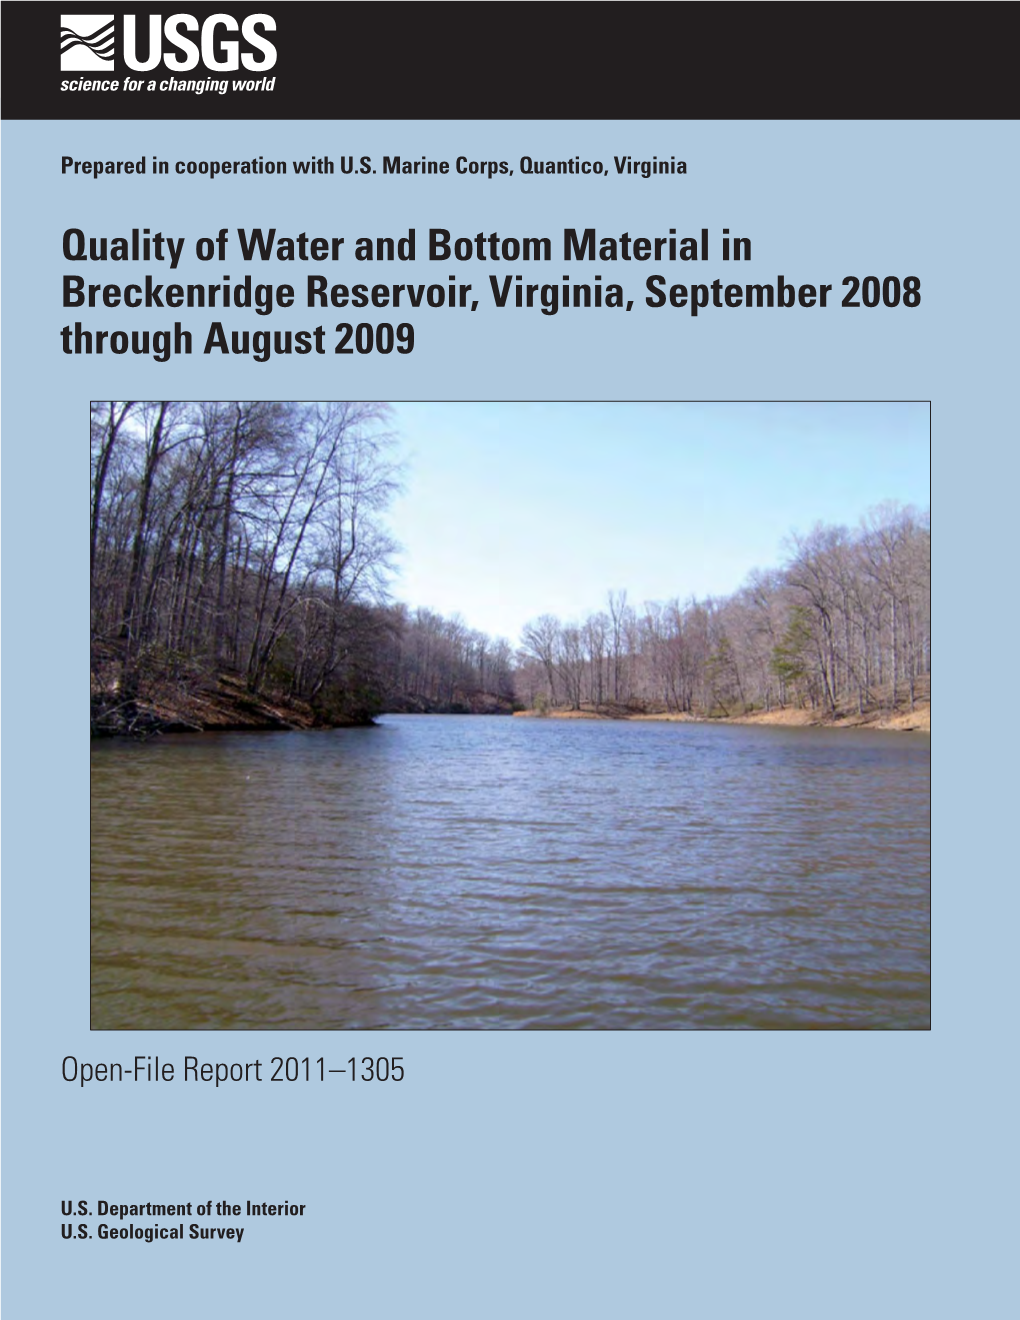 Quality of Water and Bottom Material in Breckenridge Reservoir, Virginia, September 2008 Through August 2009